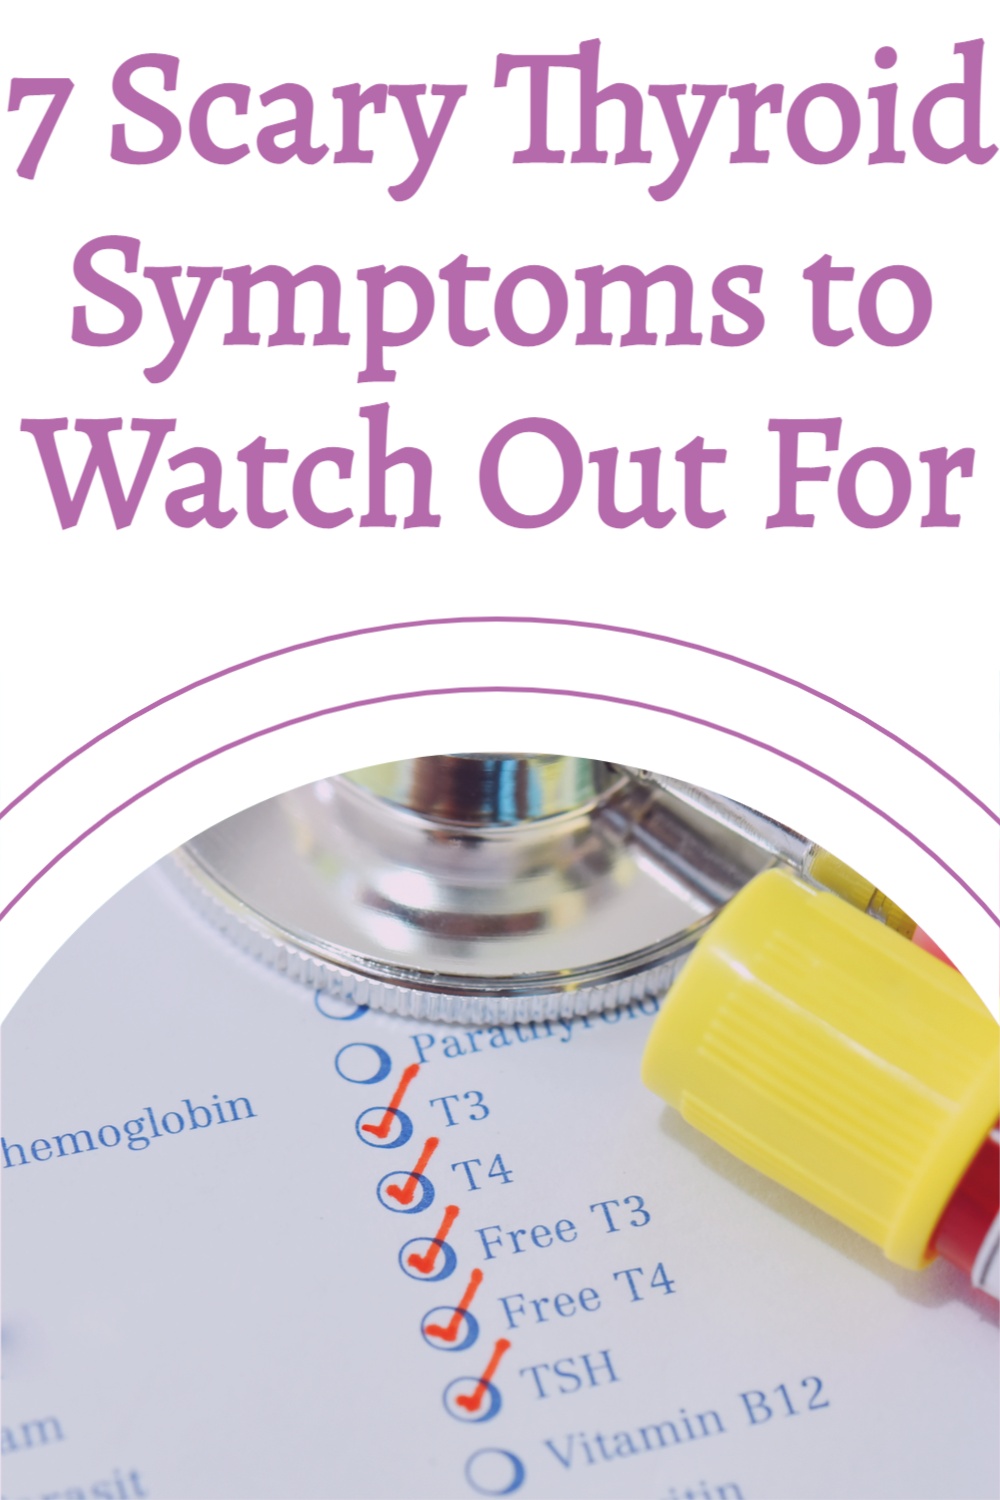 7-Scary-Thyroid-Symptoms-to-Watch-Out-For